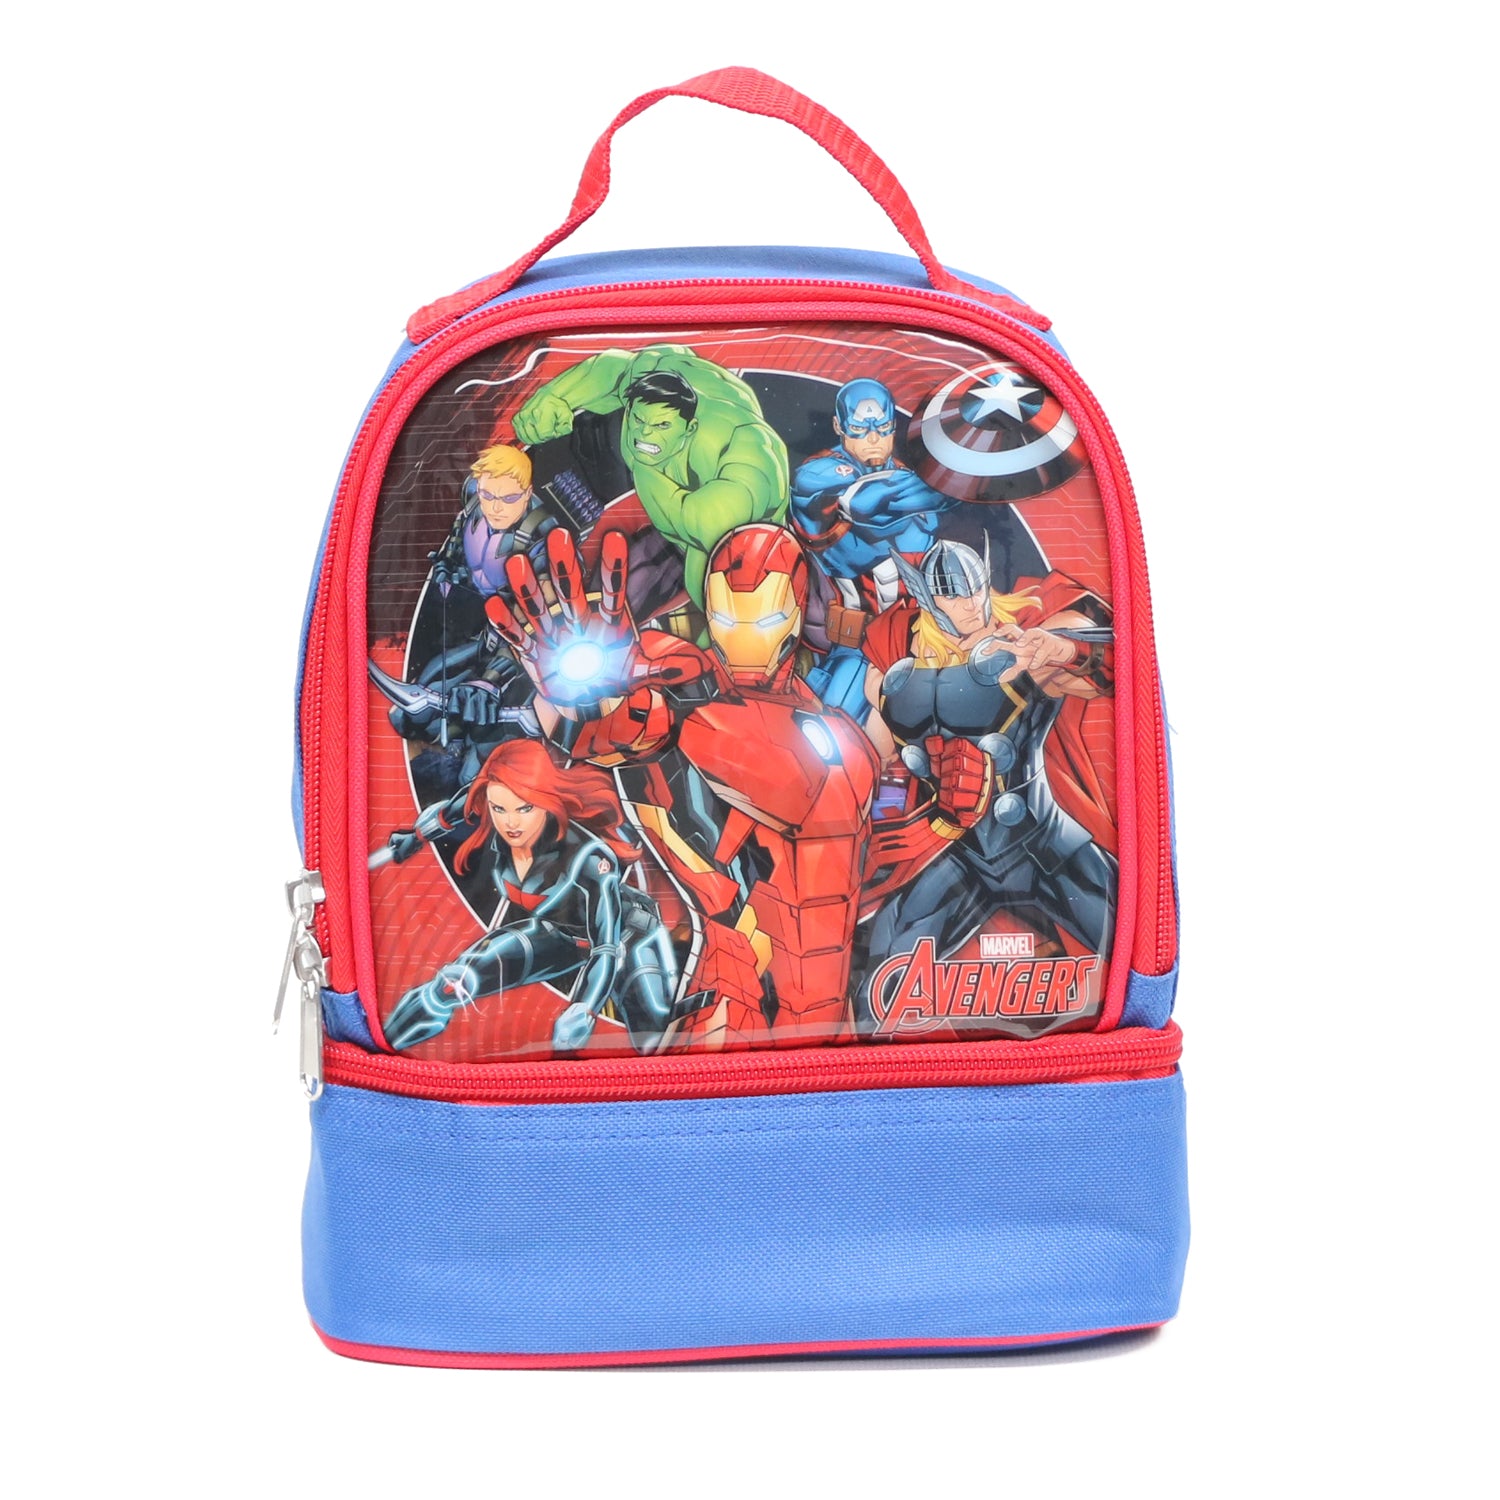 Marvel Avengers Dual Compartment Dome Lunch Box